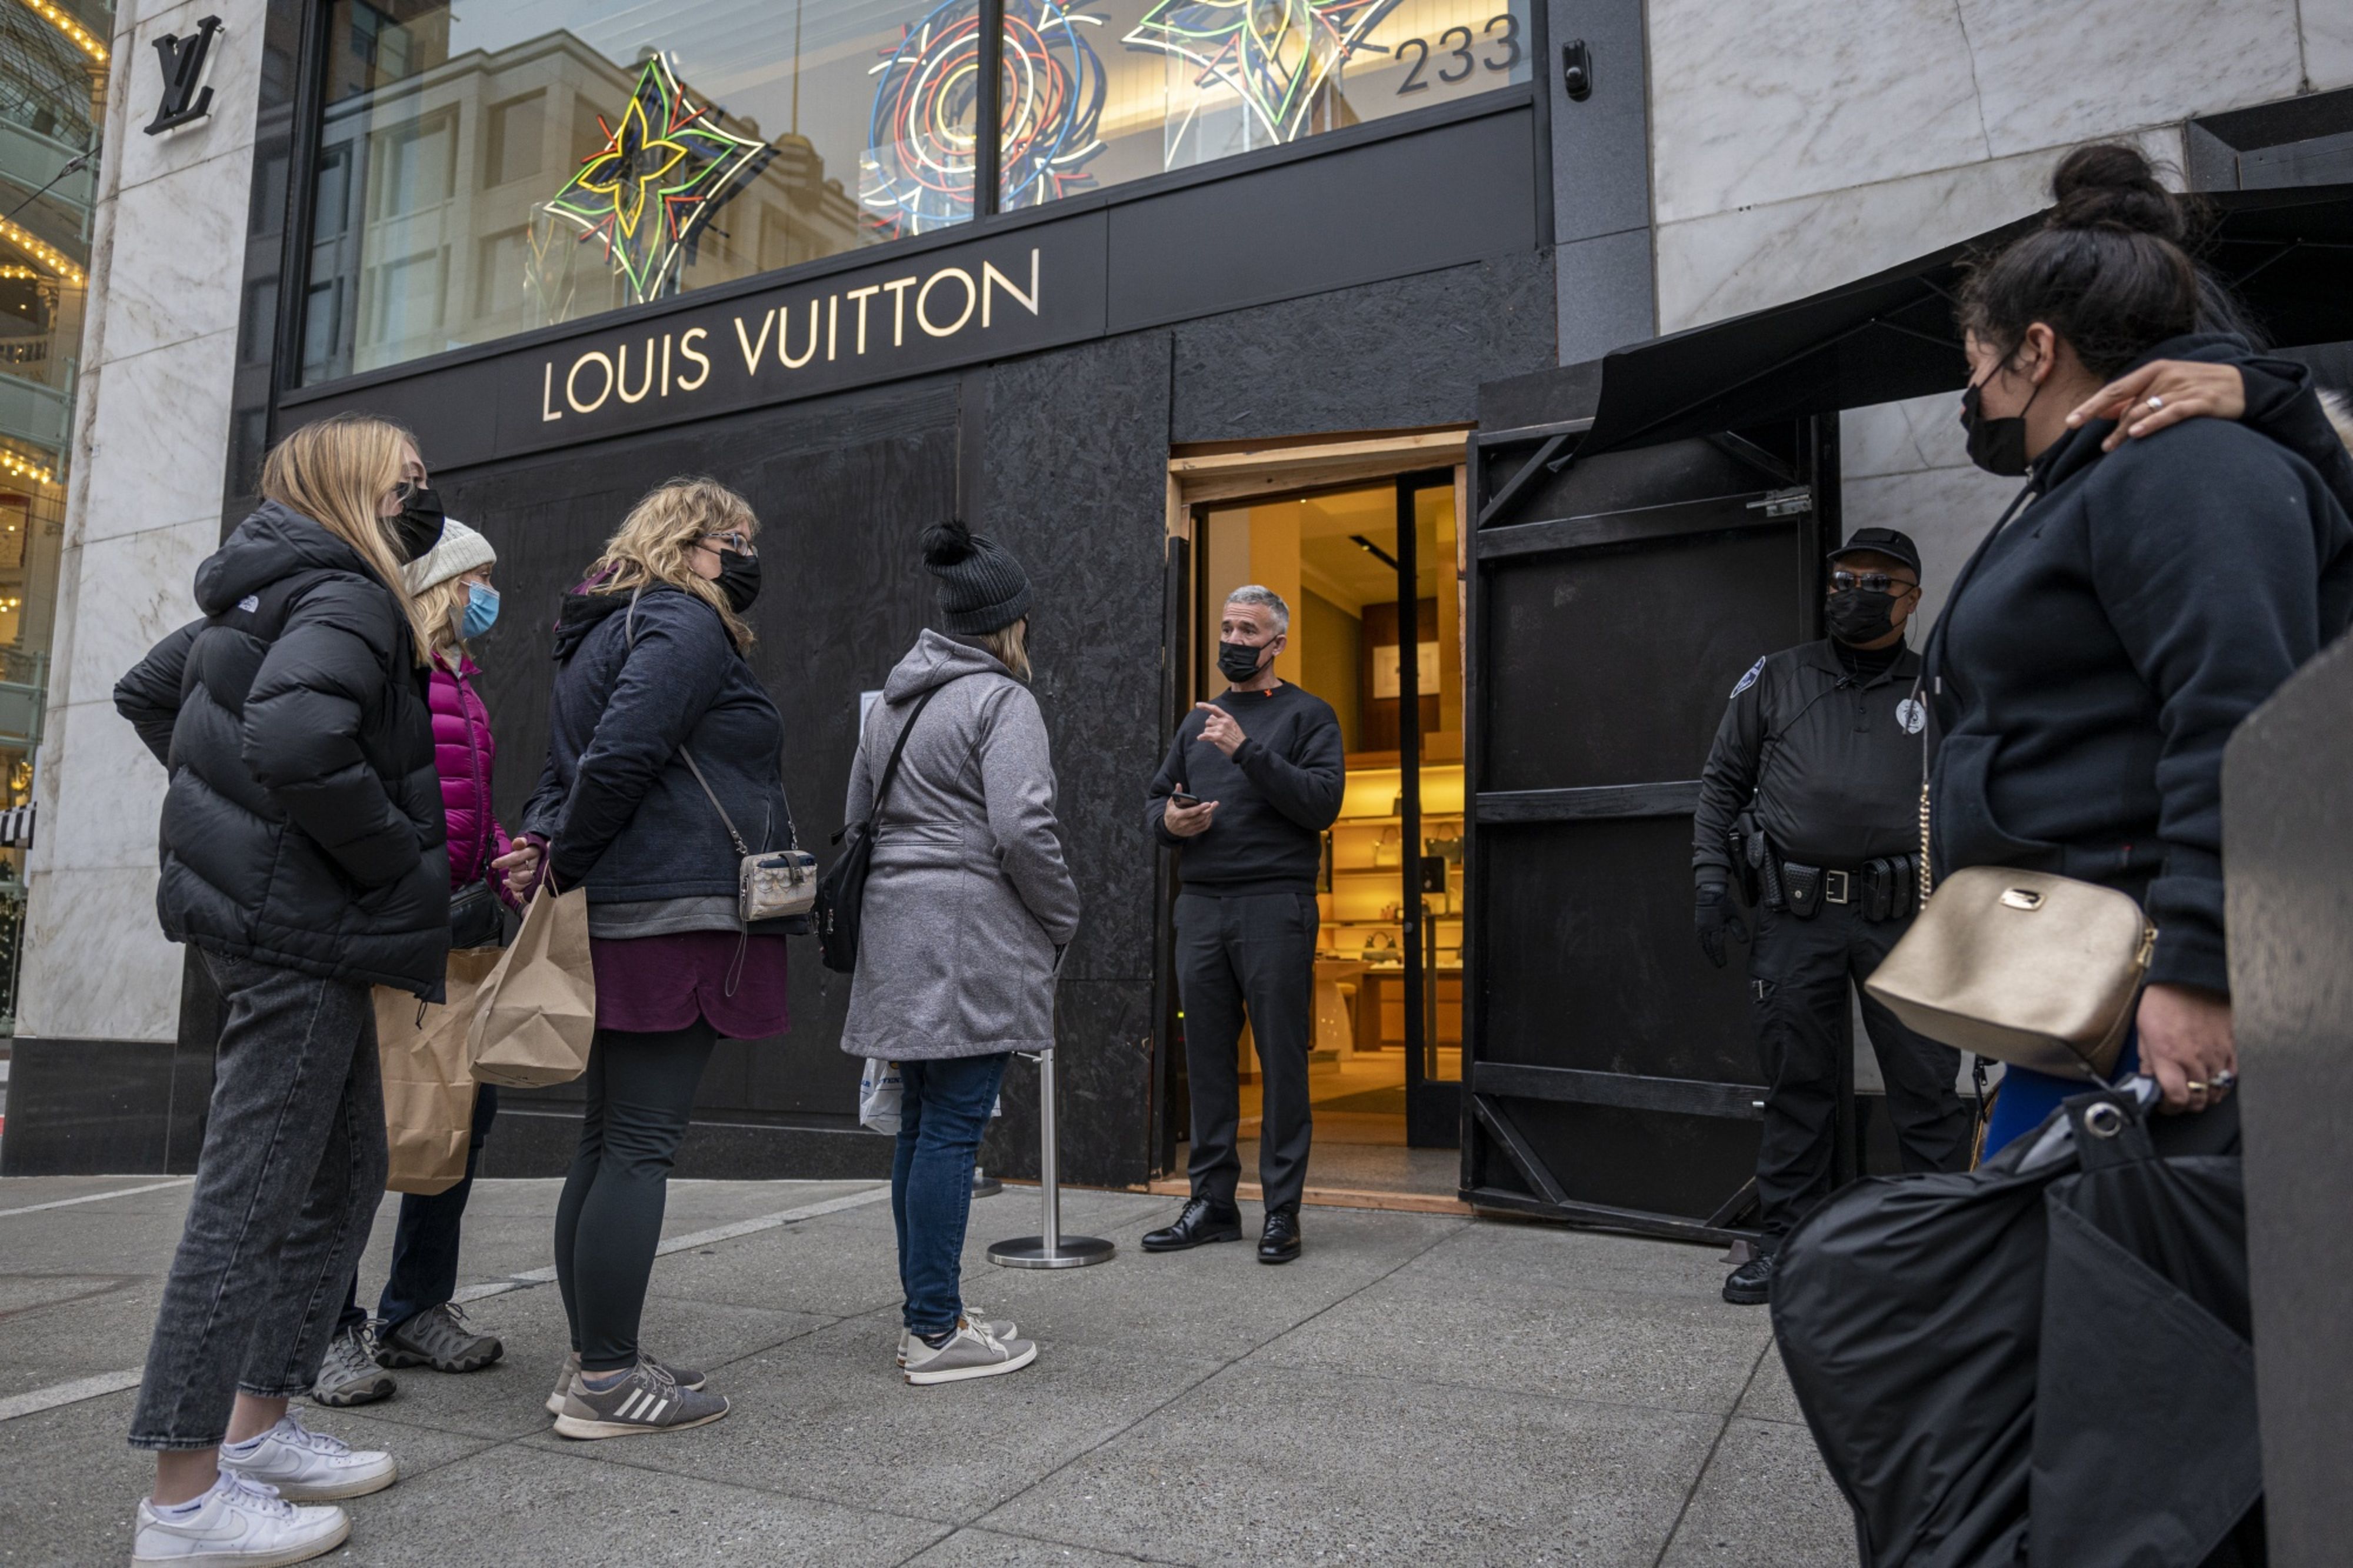 Shoppers wait in line to enter a San Francisco Louis Vuitton in Dece,ber 2021. California Govonr Gavin Newsome said the level of organized retail theft has become unacceptable as the state and increased police presence in major retail sectors. (Credit: David Paul Morris/Bloomberg) 